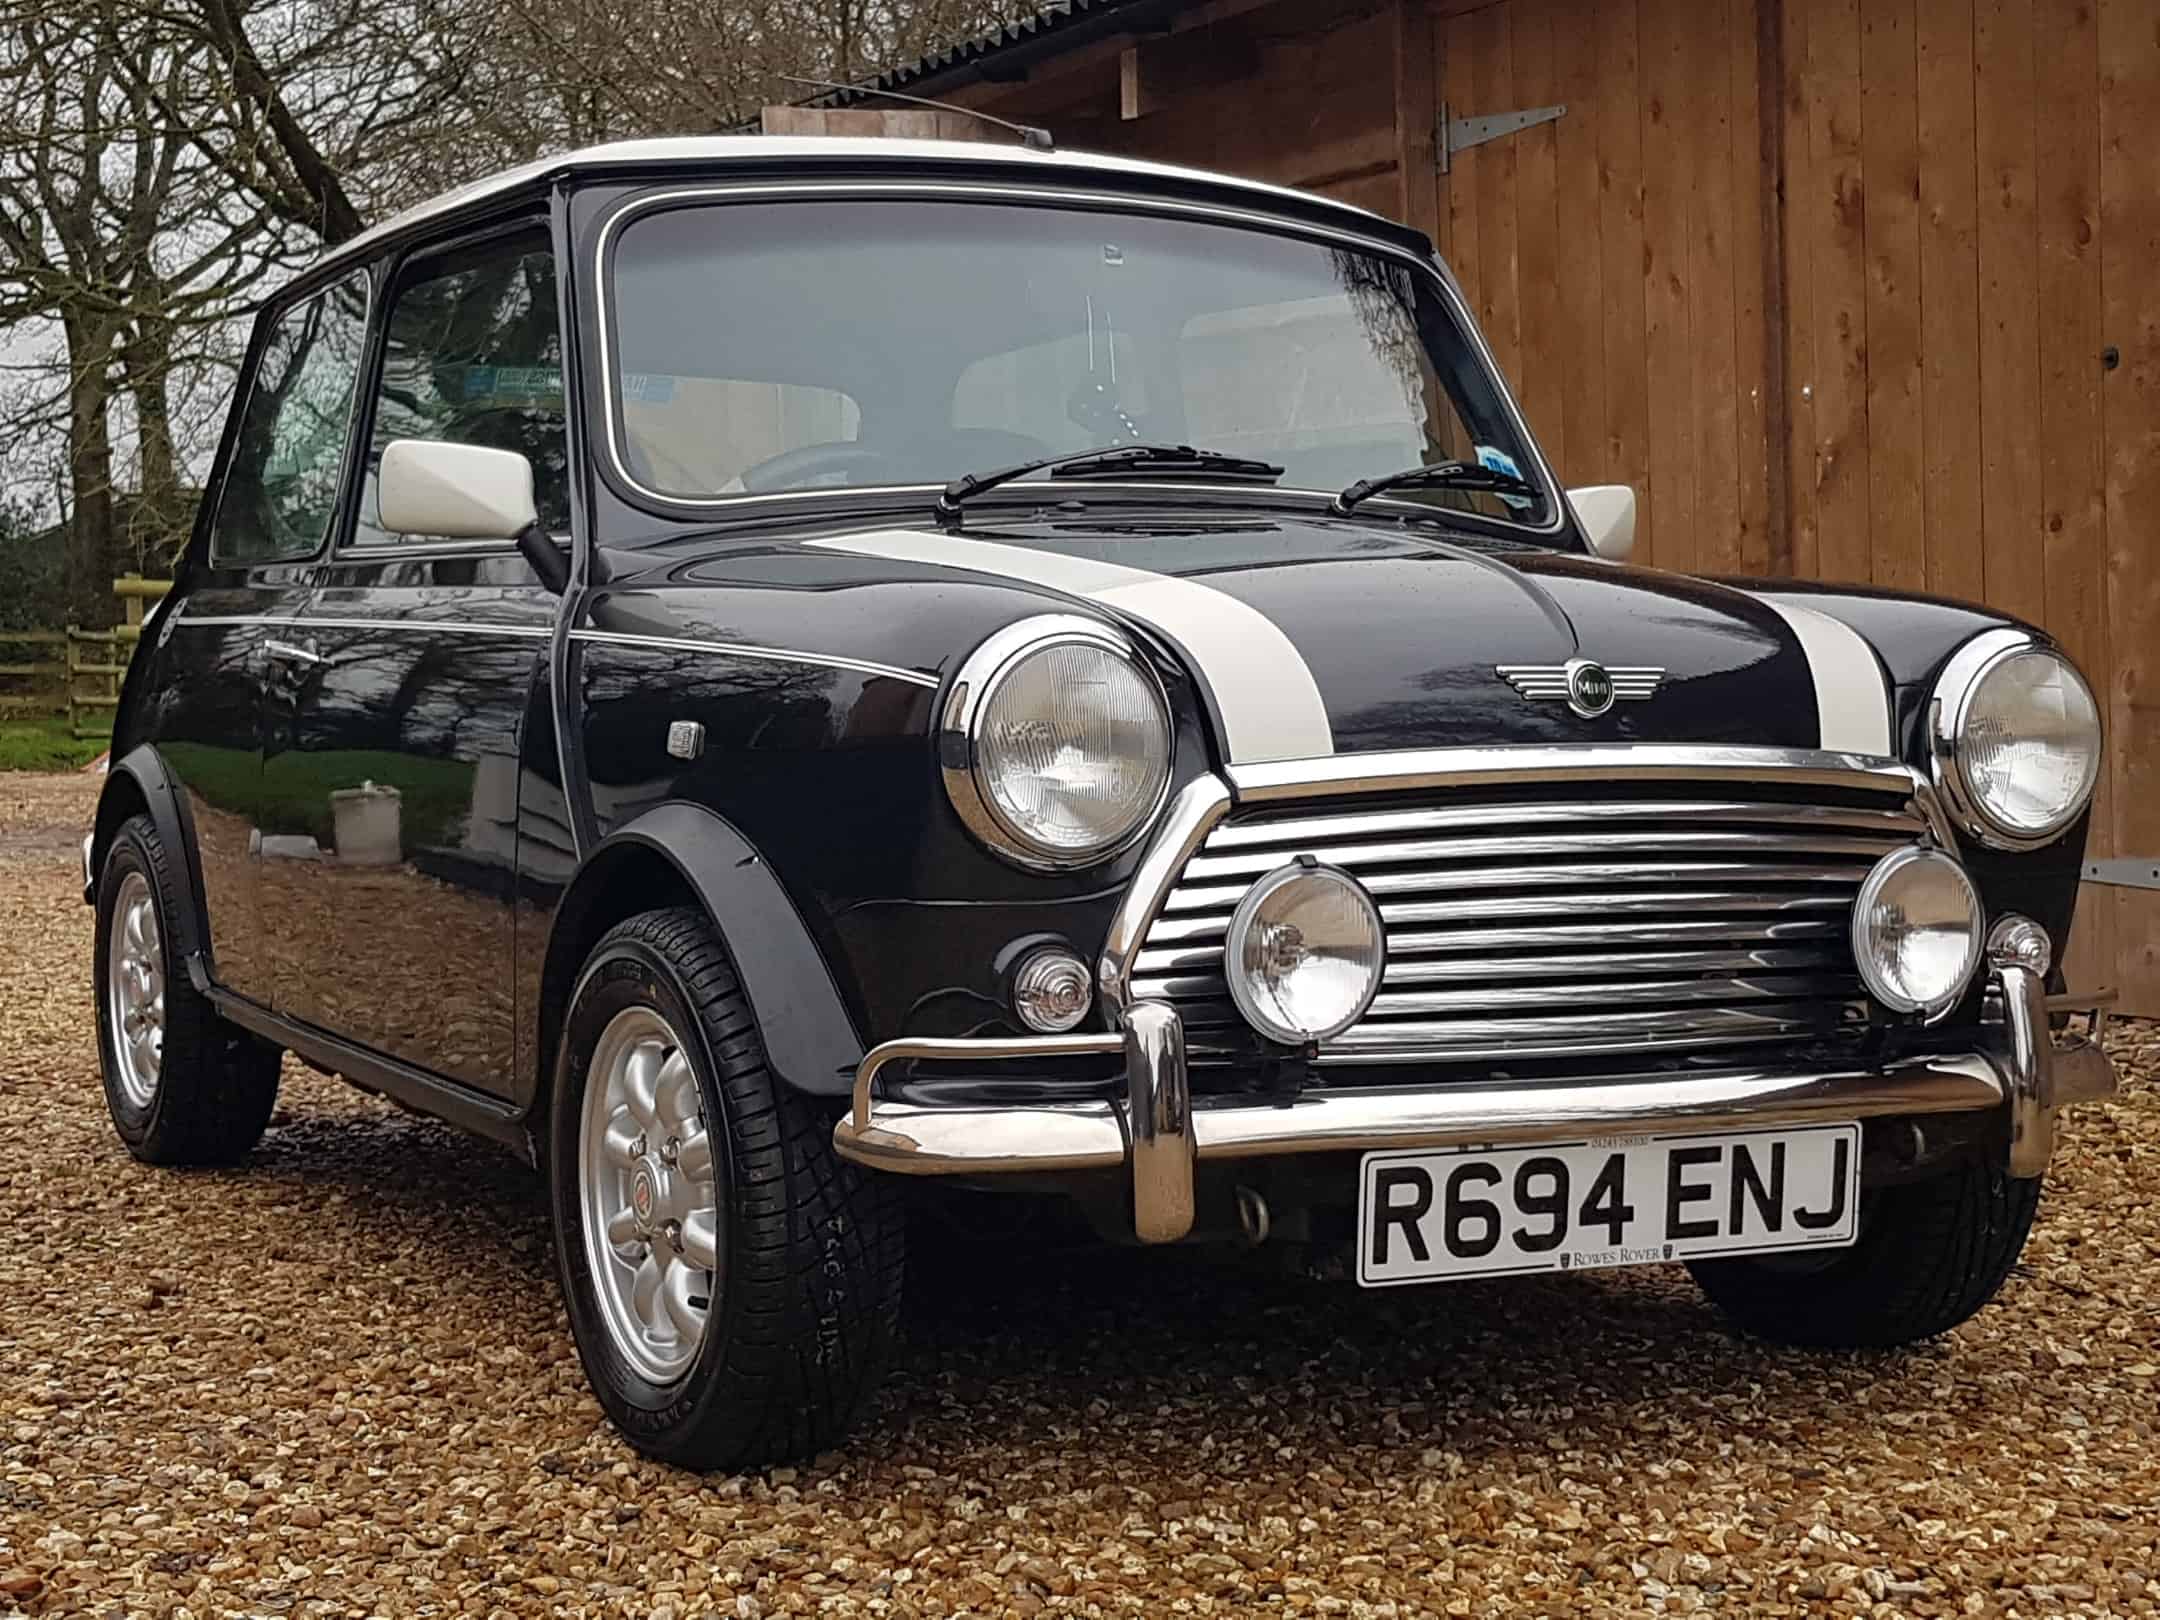 ** DEPOSIT PAID ** 1997 Mini Cooper in rare Graphite Metallic on just 7600 miles from new!